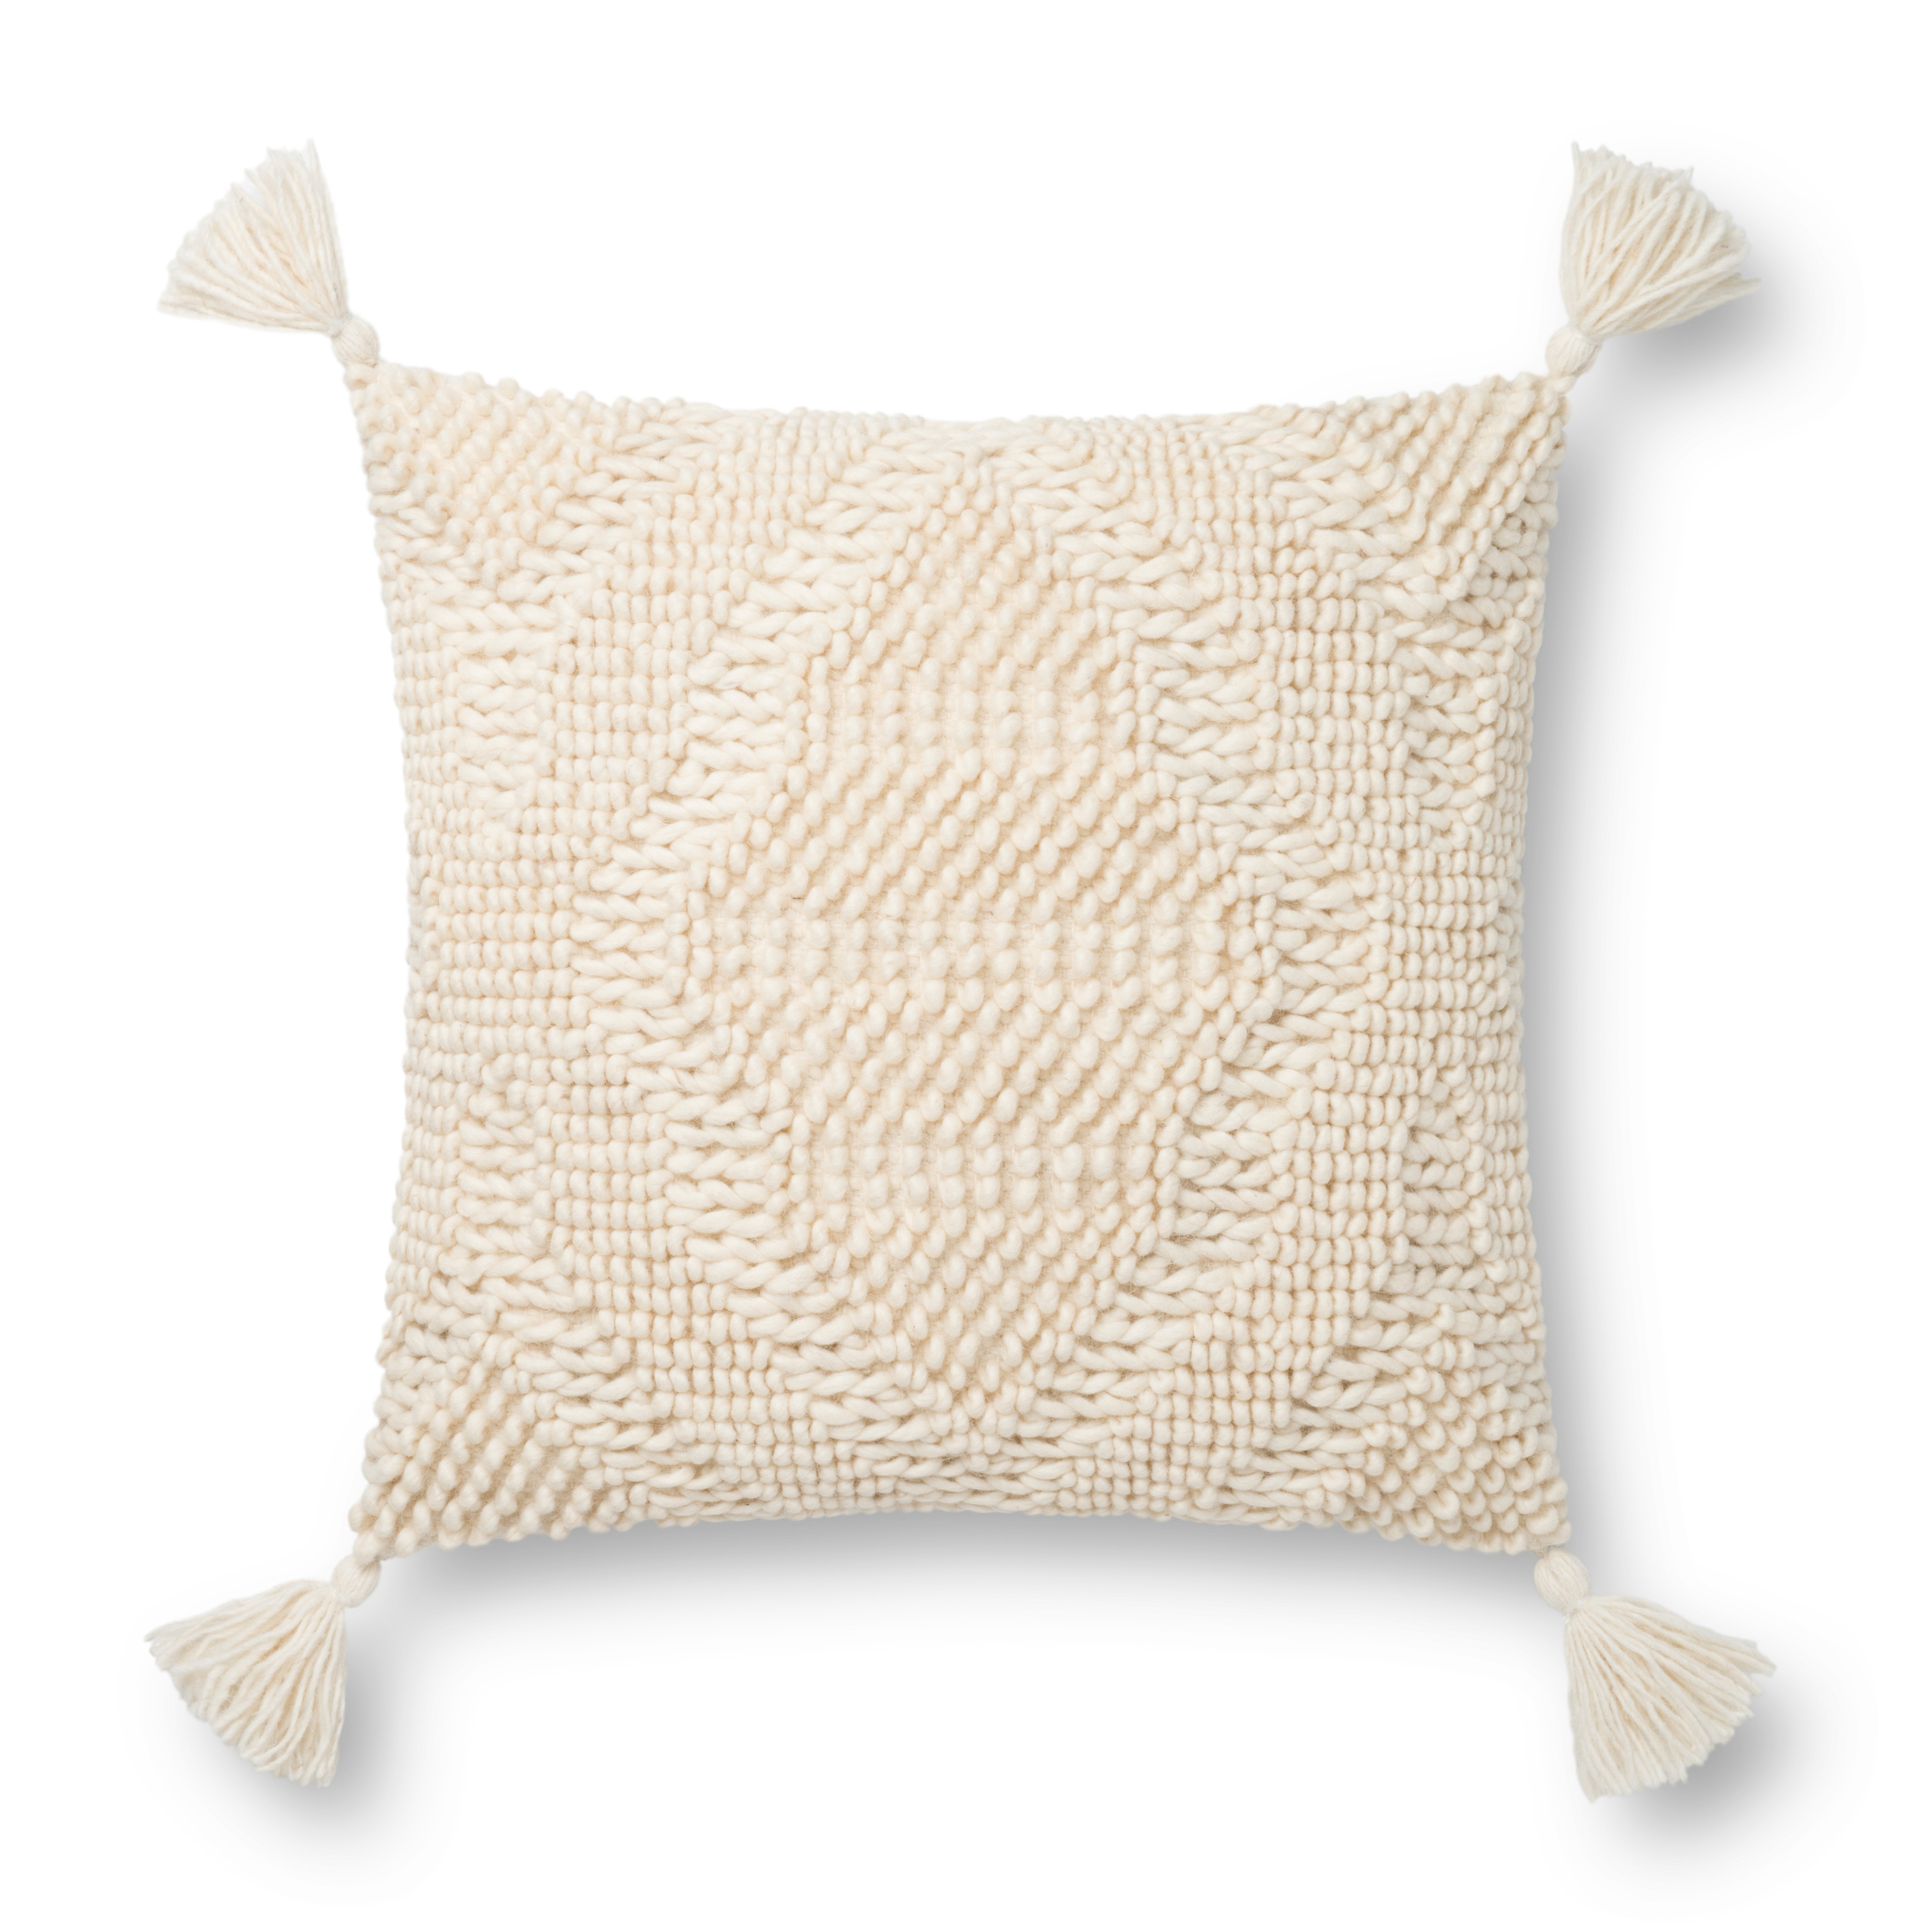 Woven Pattern Throw Pillow with Tassels, 18" x 18", Ivory - Magnolia Home by Joana Gaines Crafted by Loloi Rugs